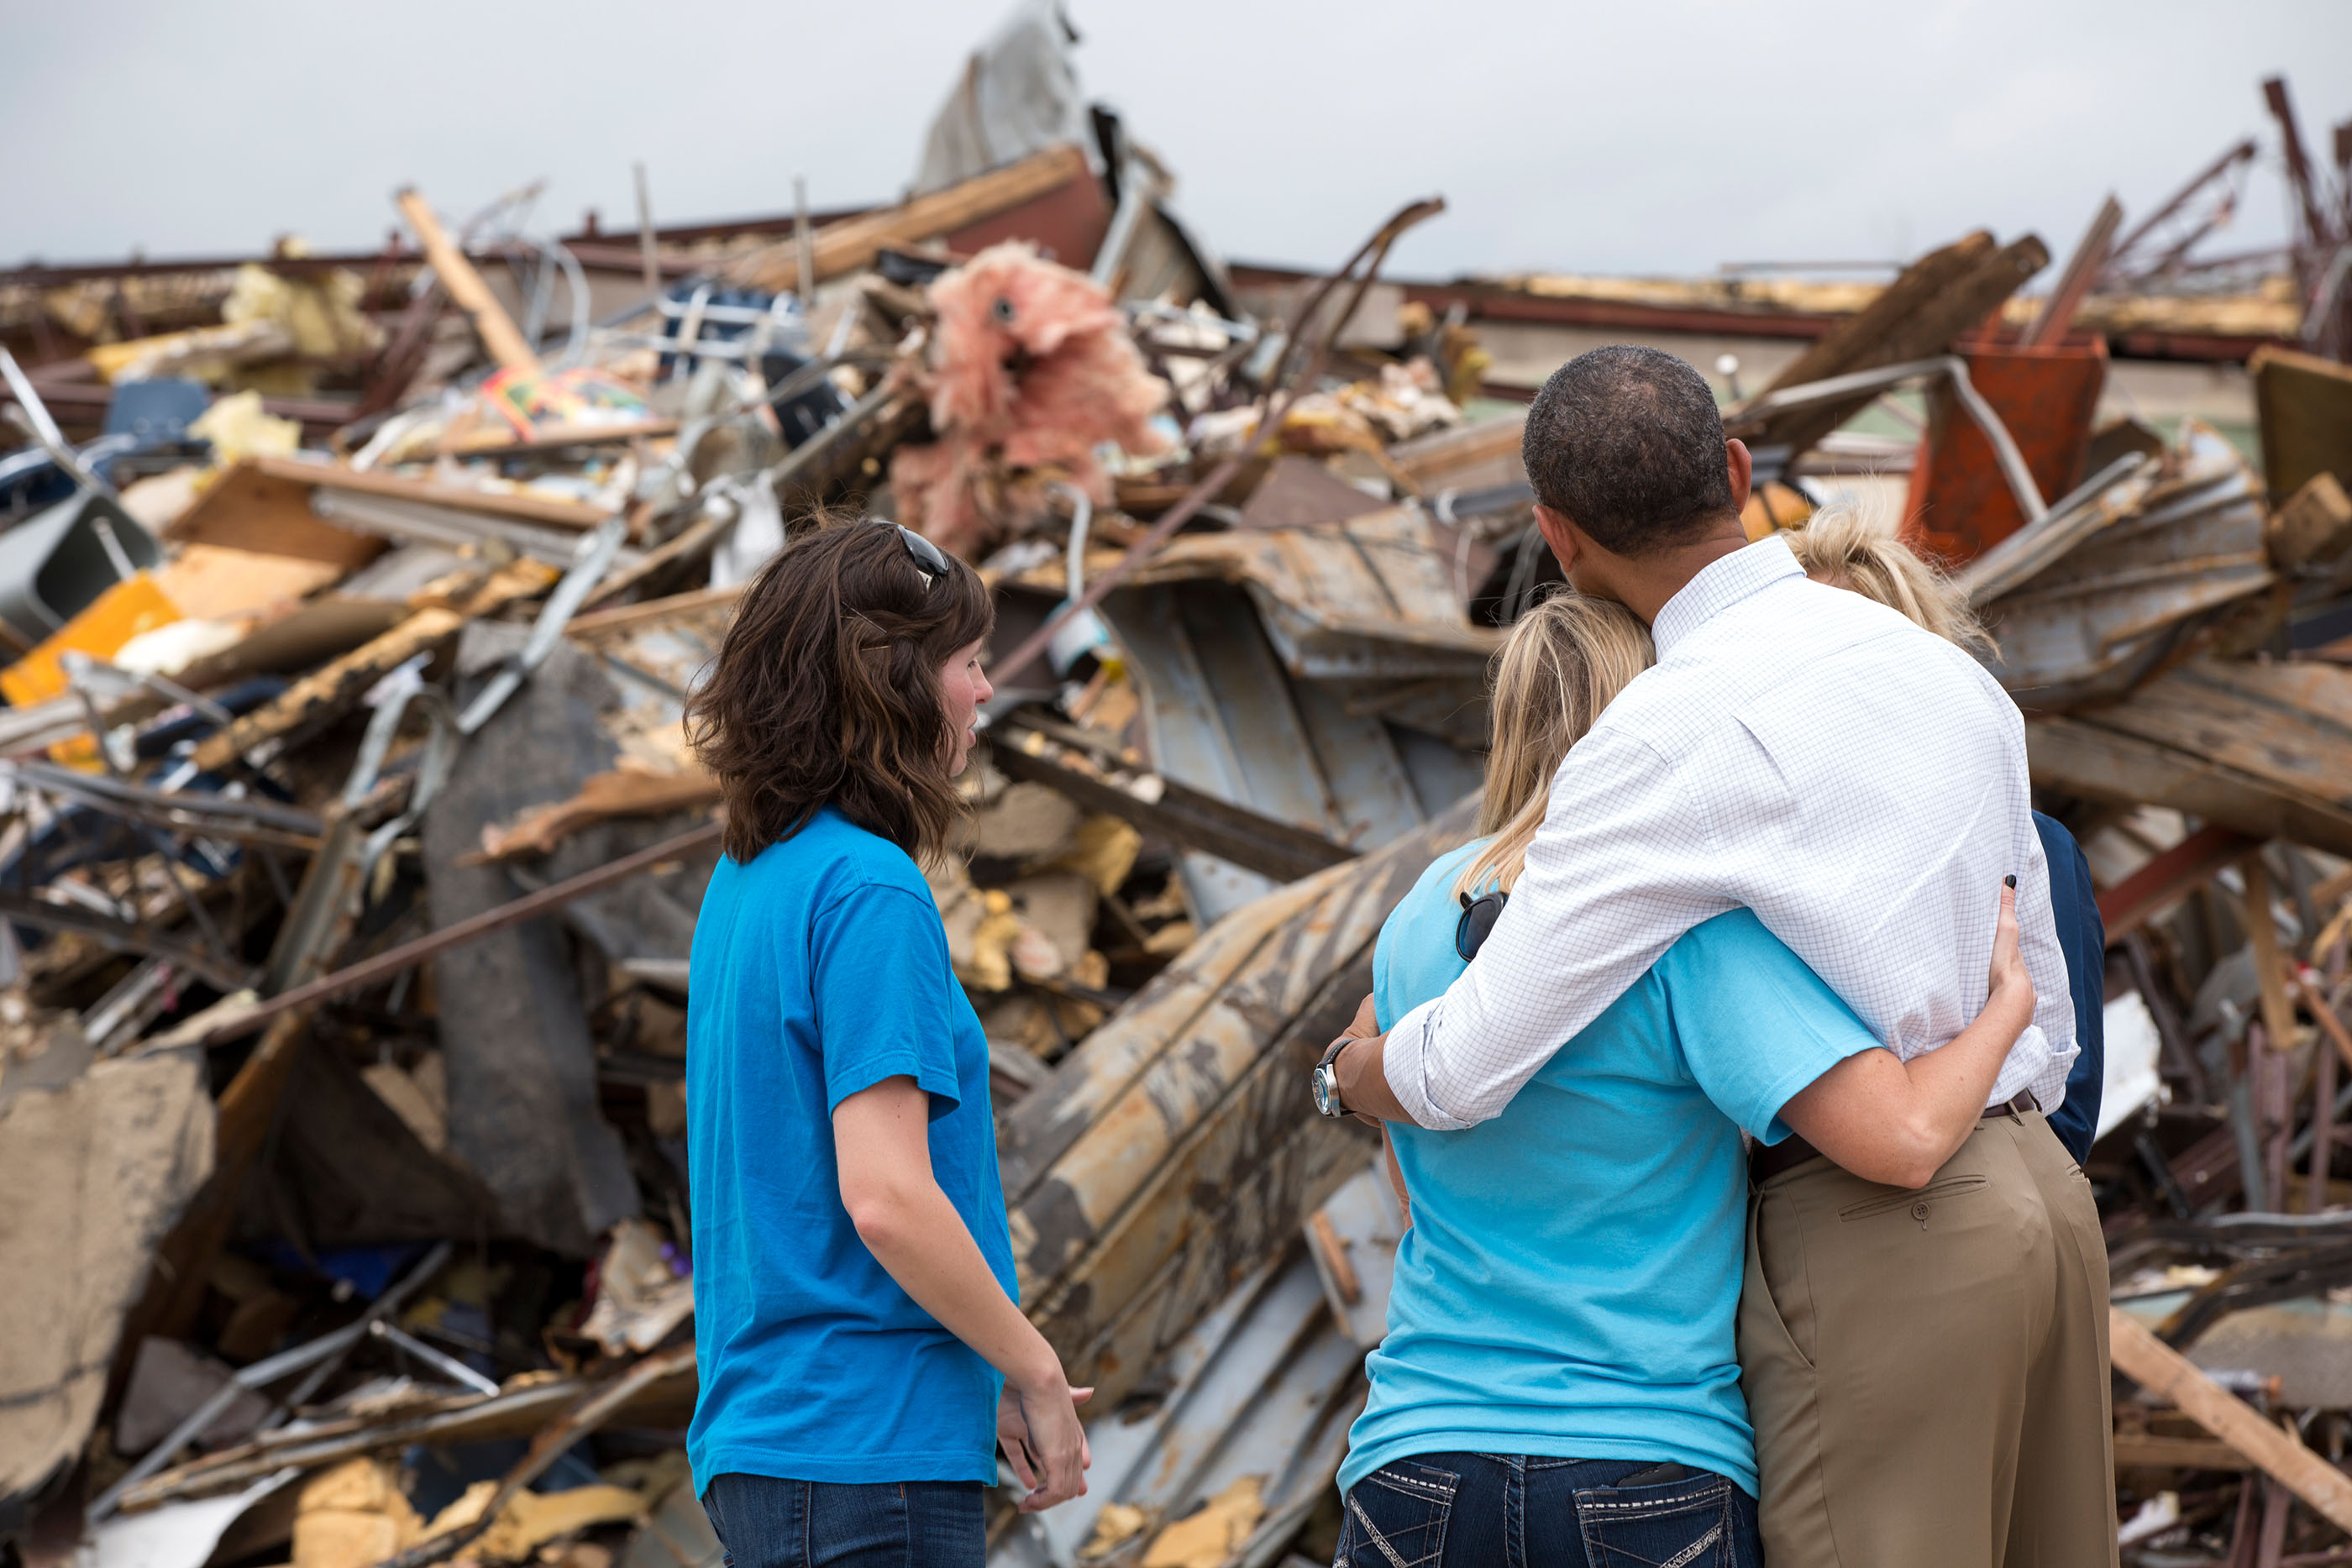 Oklahoma, May 26, 2013. Hugging Amy Simpson, principal of Plaza Towers Elementary School, while viewing the remains of the school following a devastating tornado in Moore. (Official White House Photo by Pete Souza)